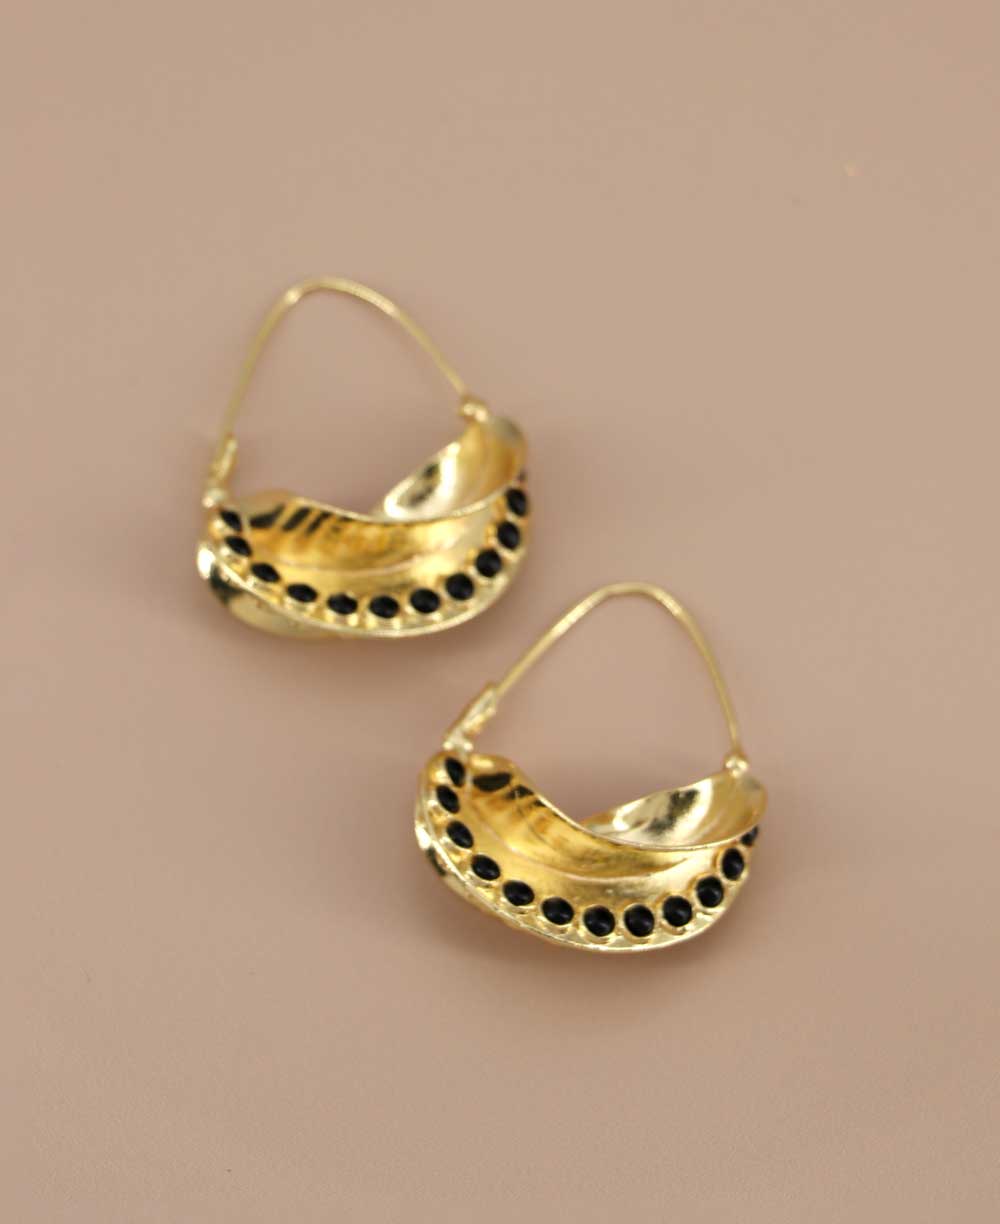 Gold plated crescent moon earrings with onyx beads